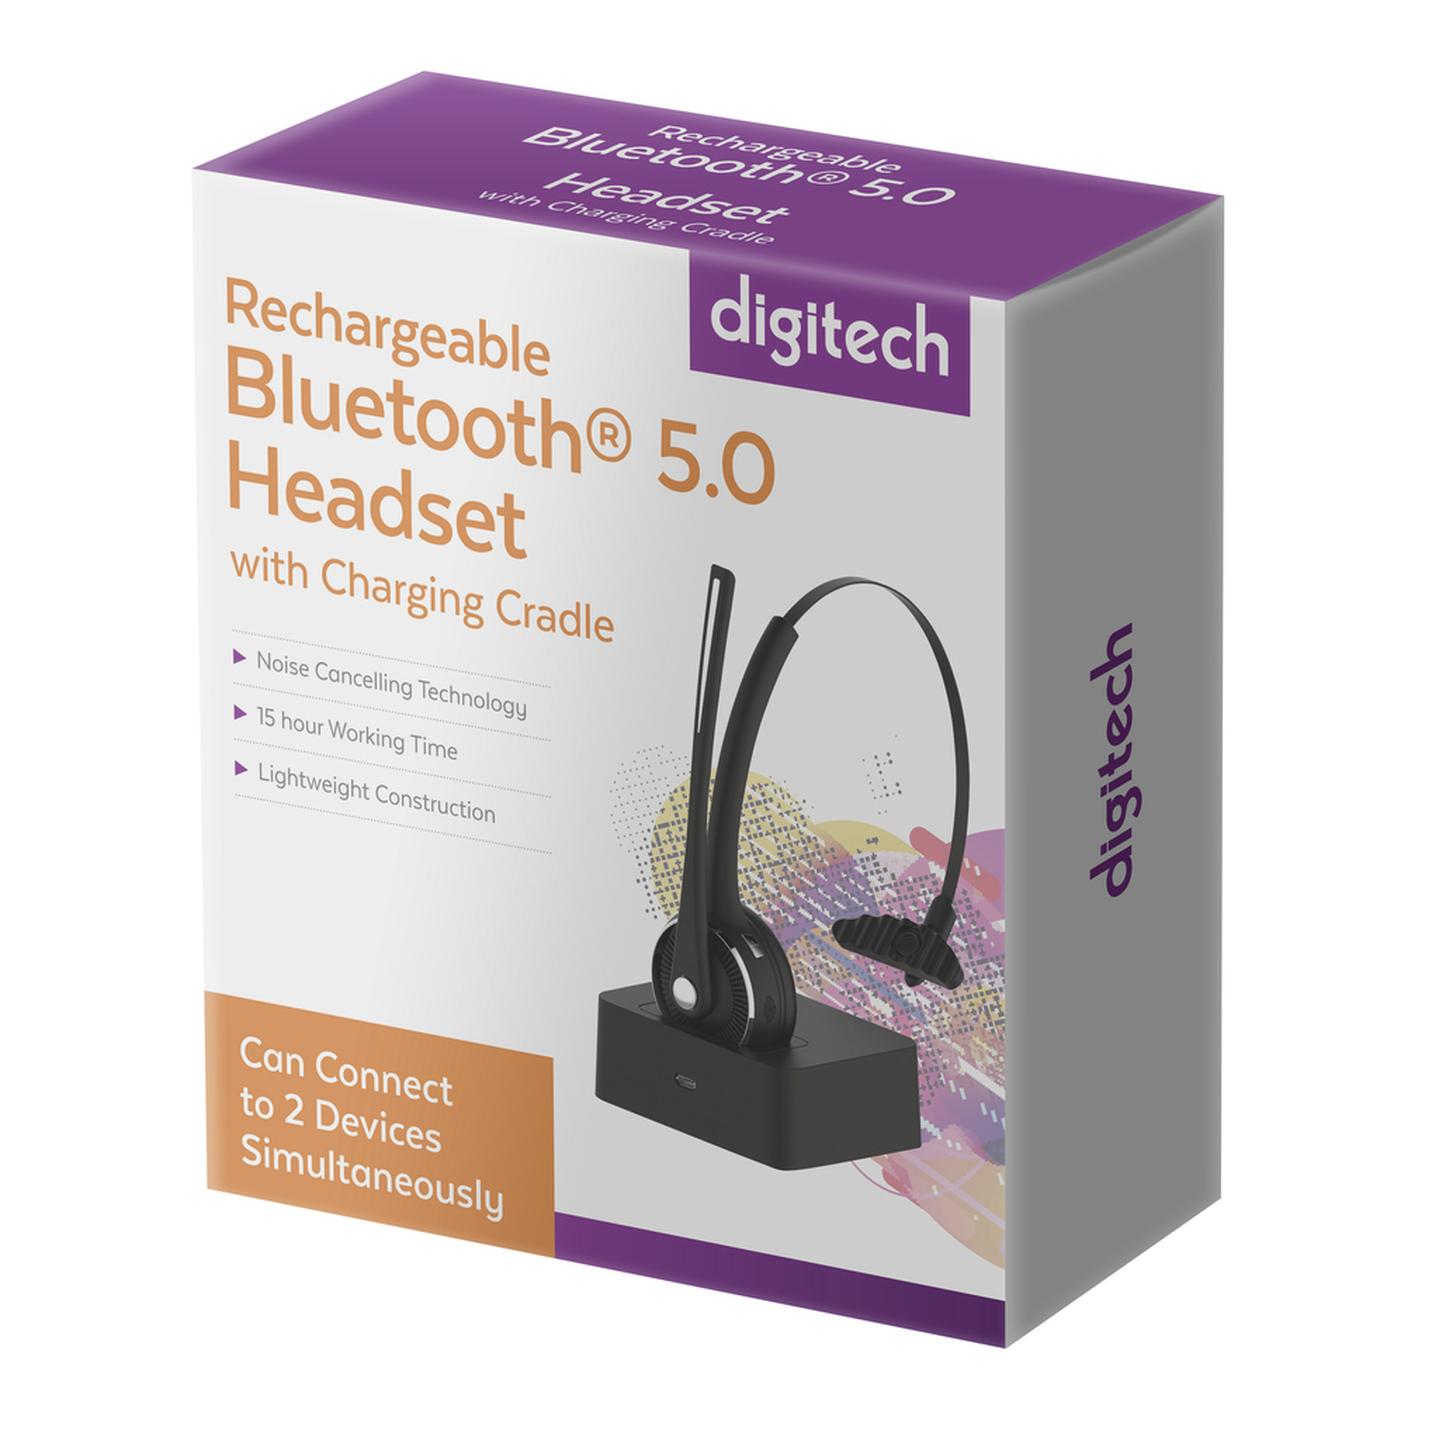 Digitech Rechargeable Bluetooth 5.0 Headset with Charging Cradle